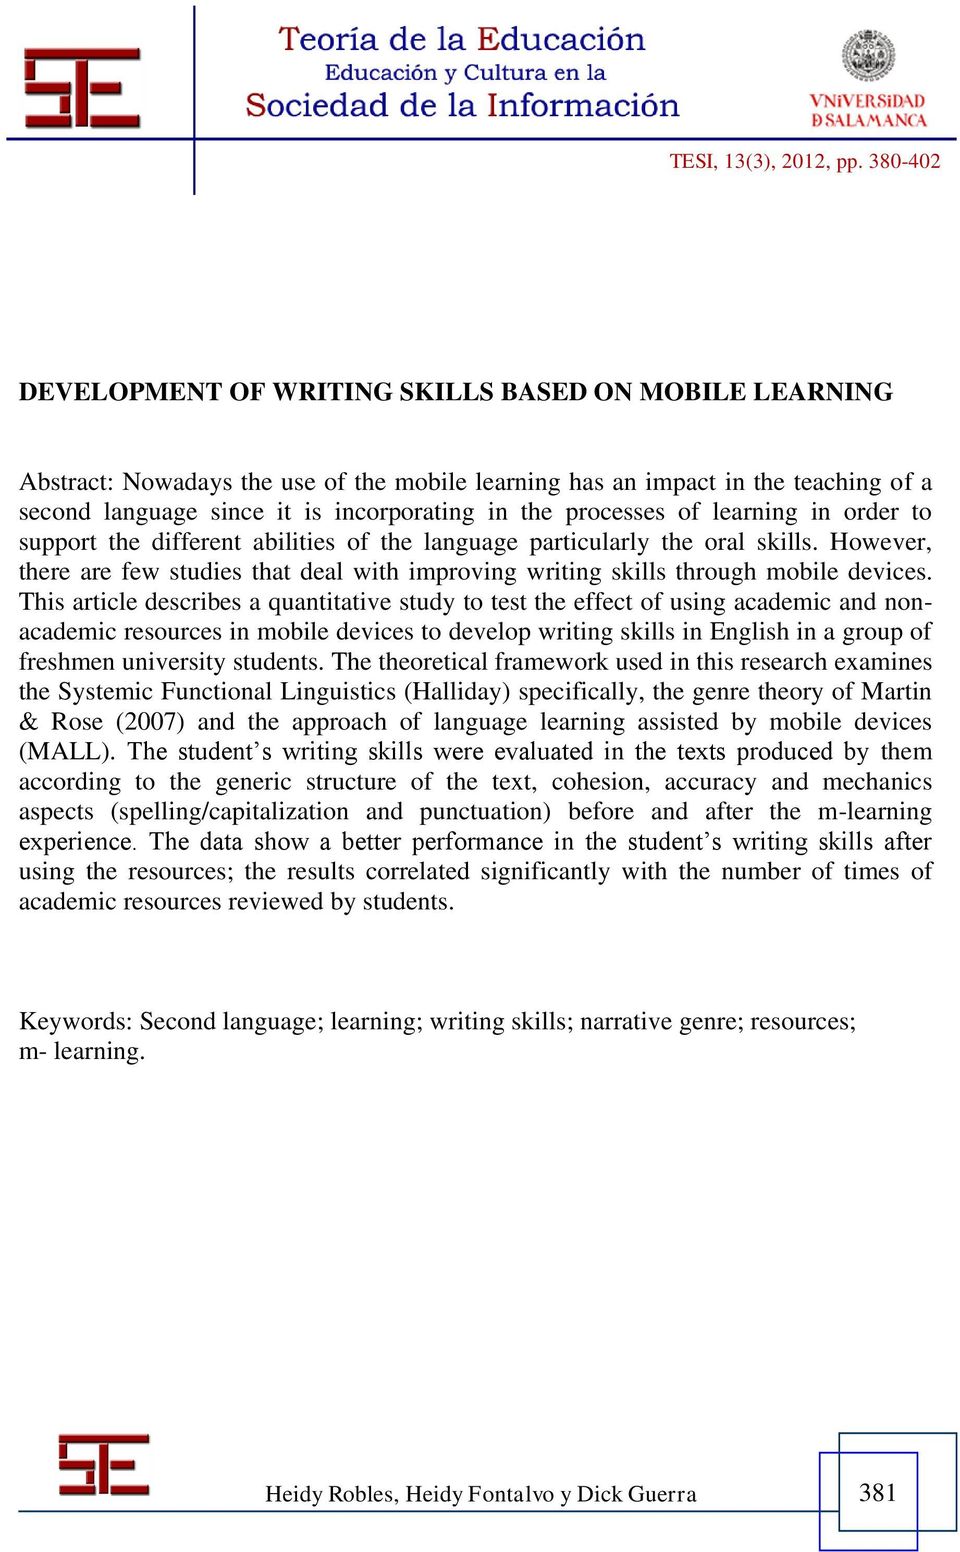 This article describes a quantitative study to test the effect of using academic and nonacademic resources in mobile devices to develop writing skills in English in a group of freshmen university